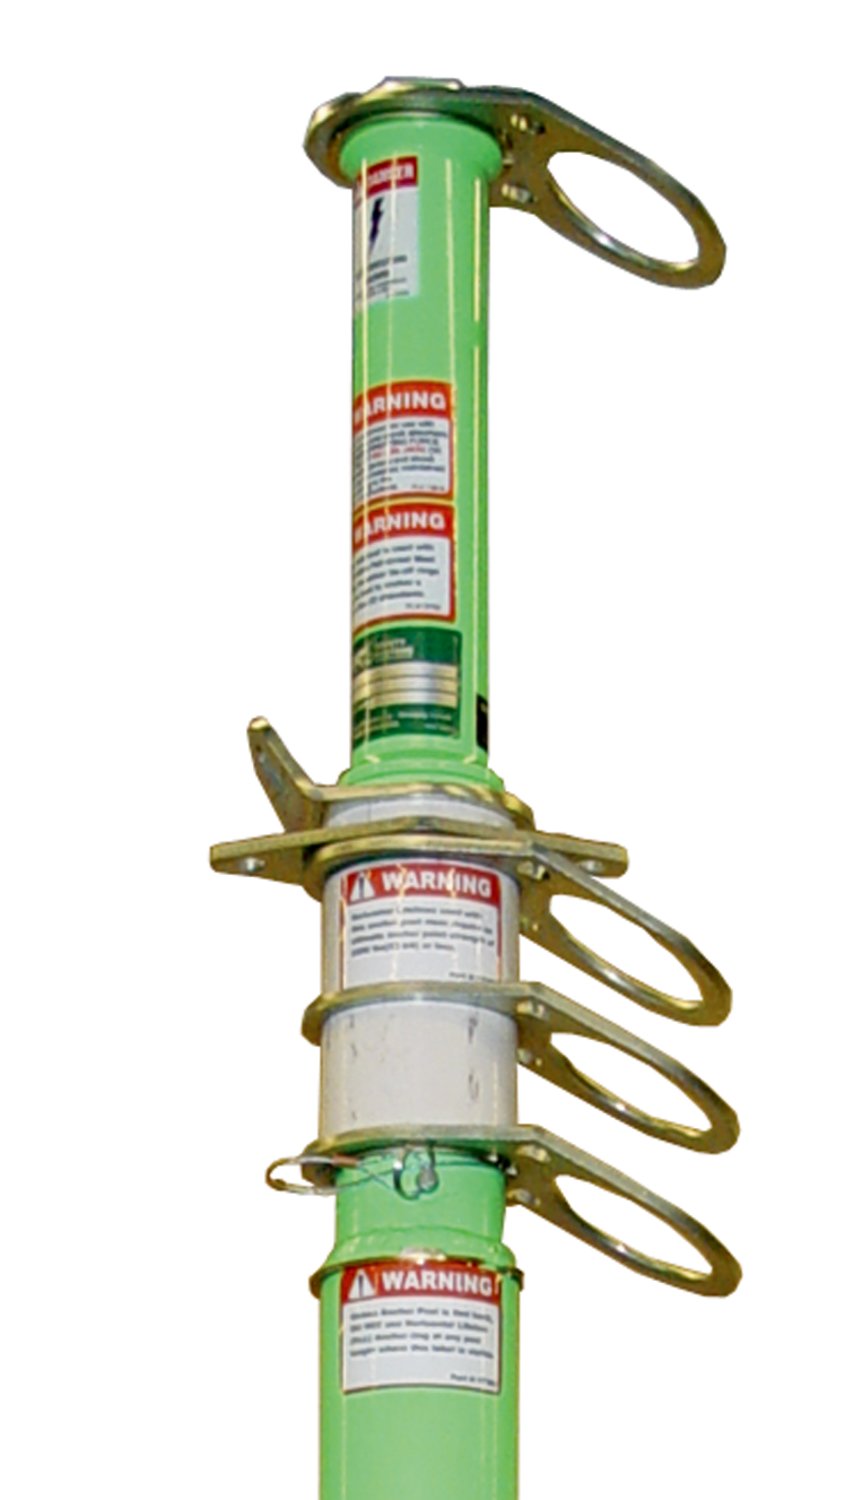 7100231964 - 3M DBI-SALA Confined Space Portable Telescoping Fall Arrest Post
Extension 8516692, 14 in